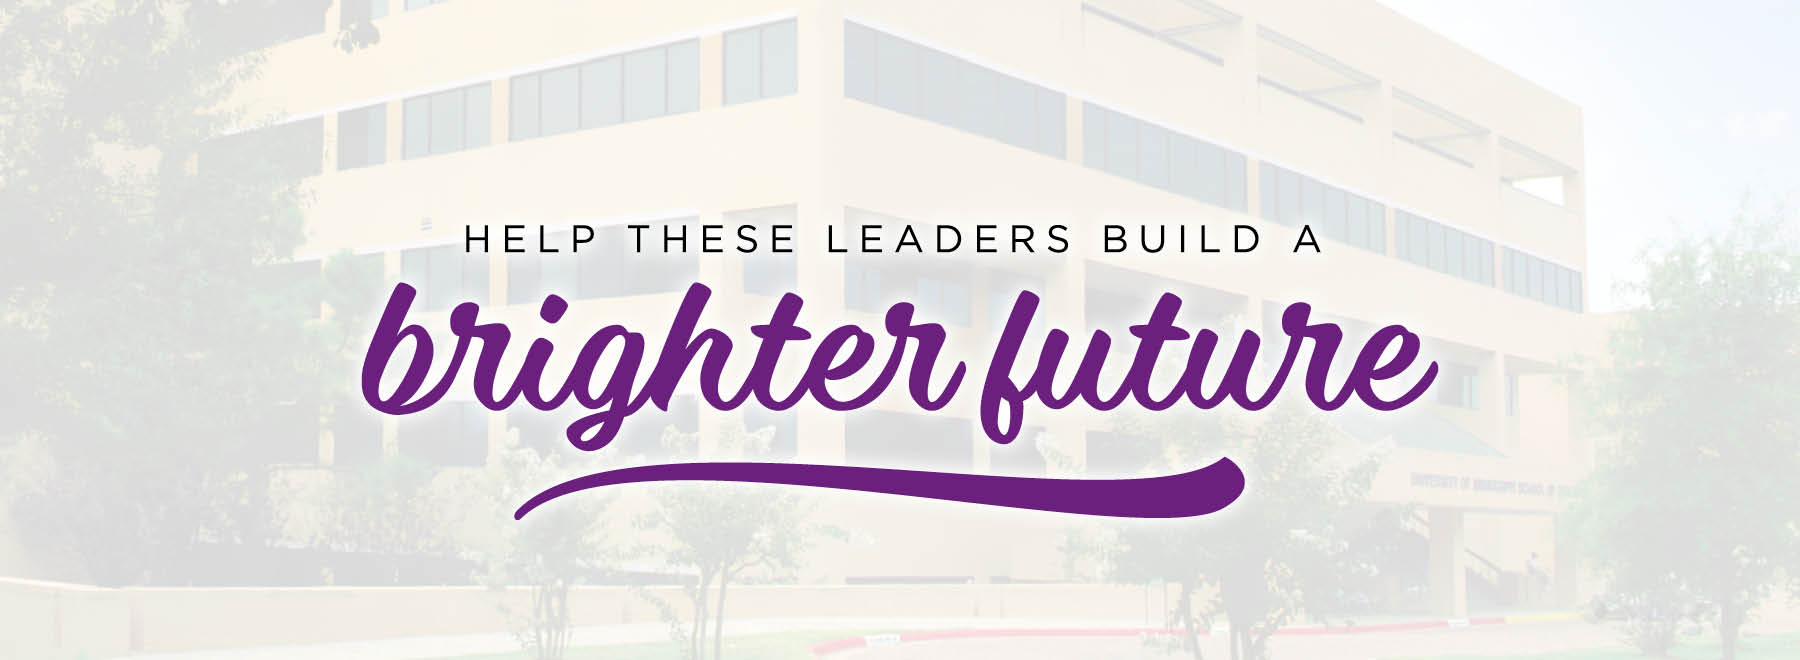 Help These Leaders Build a Brighter Future